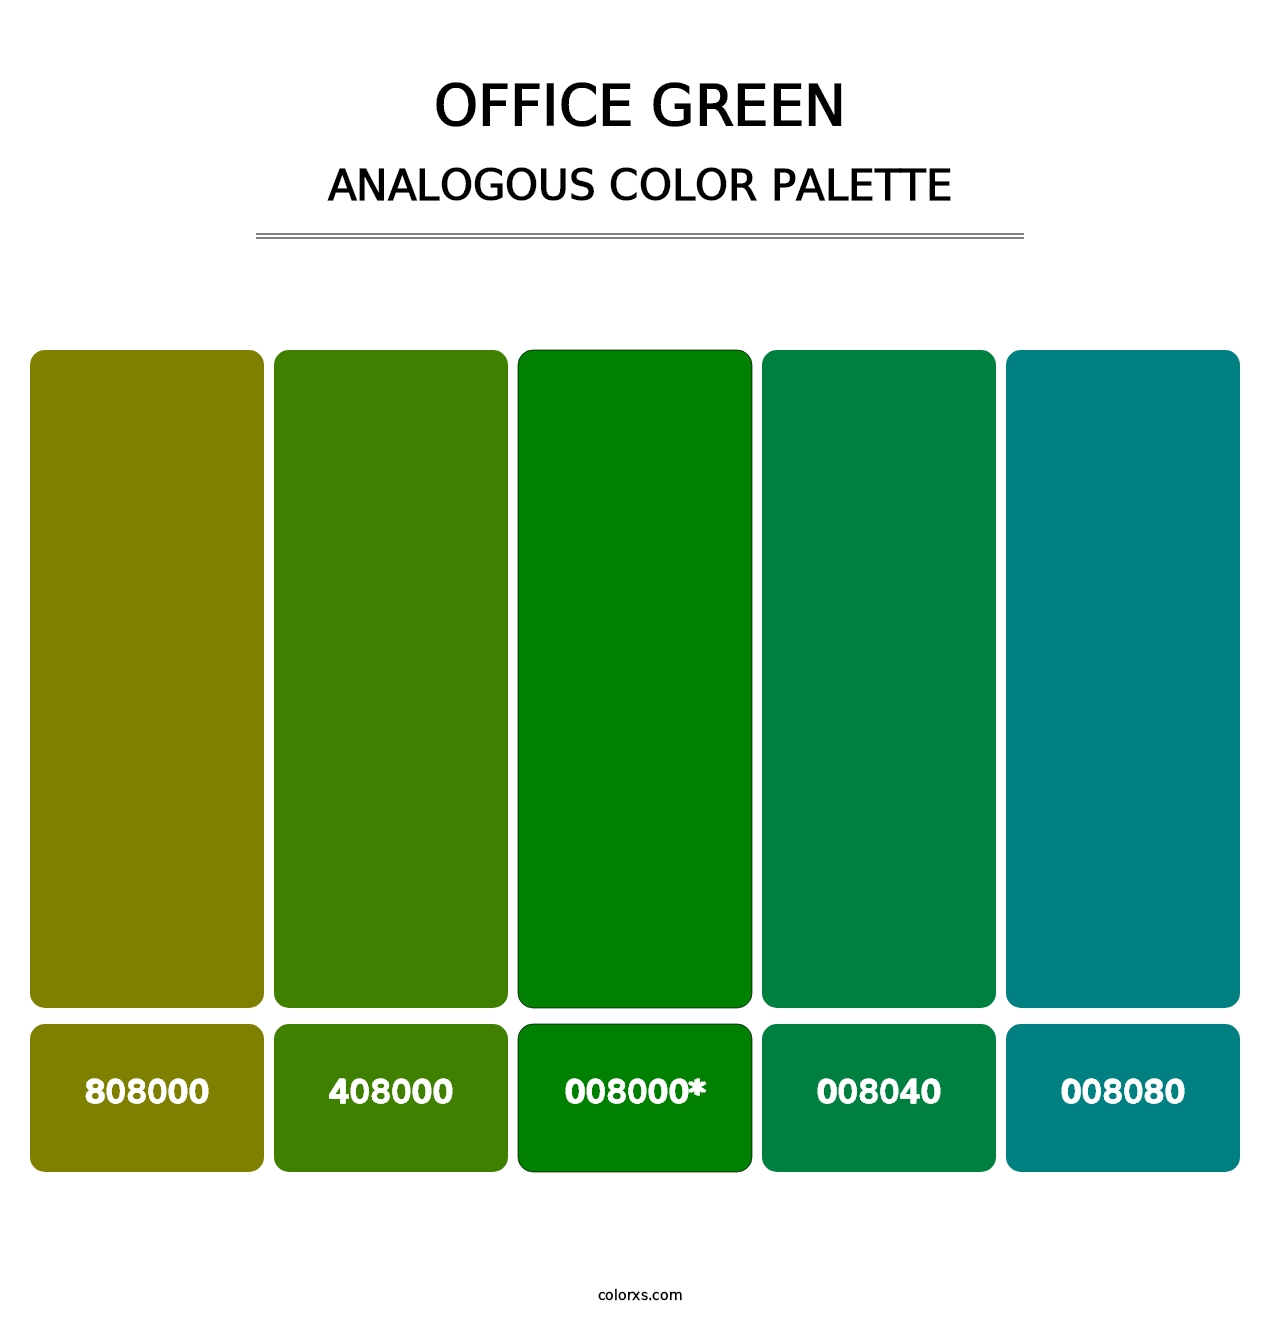 Office Green - Analogous Color Palette